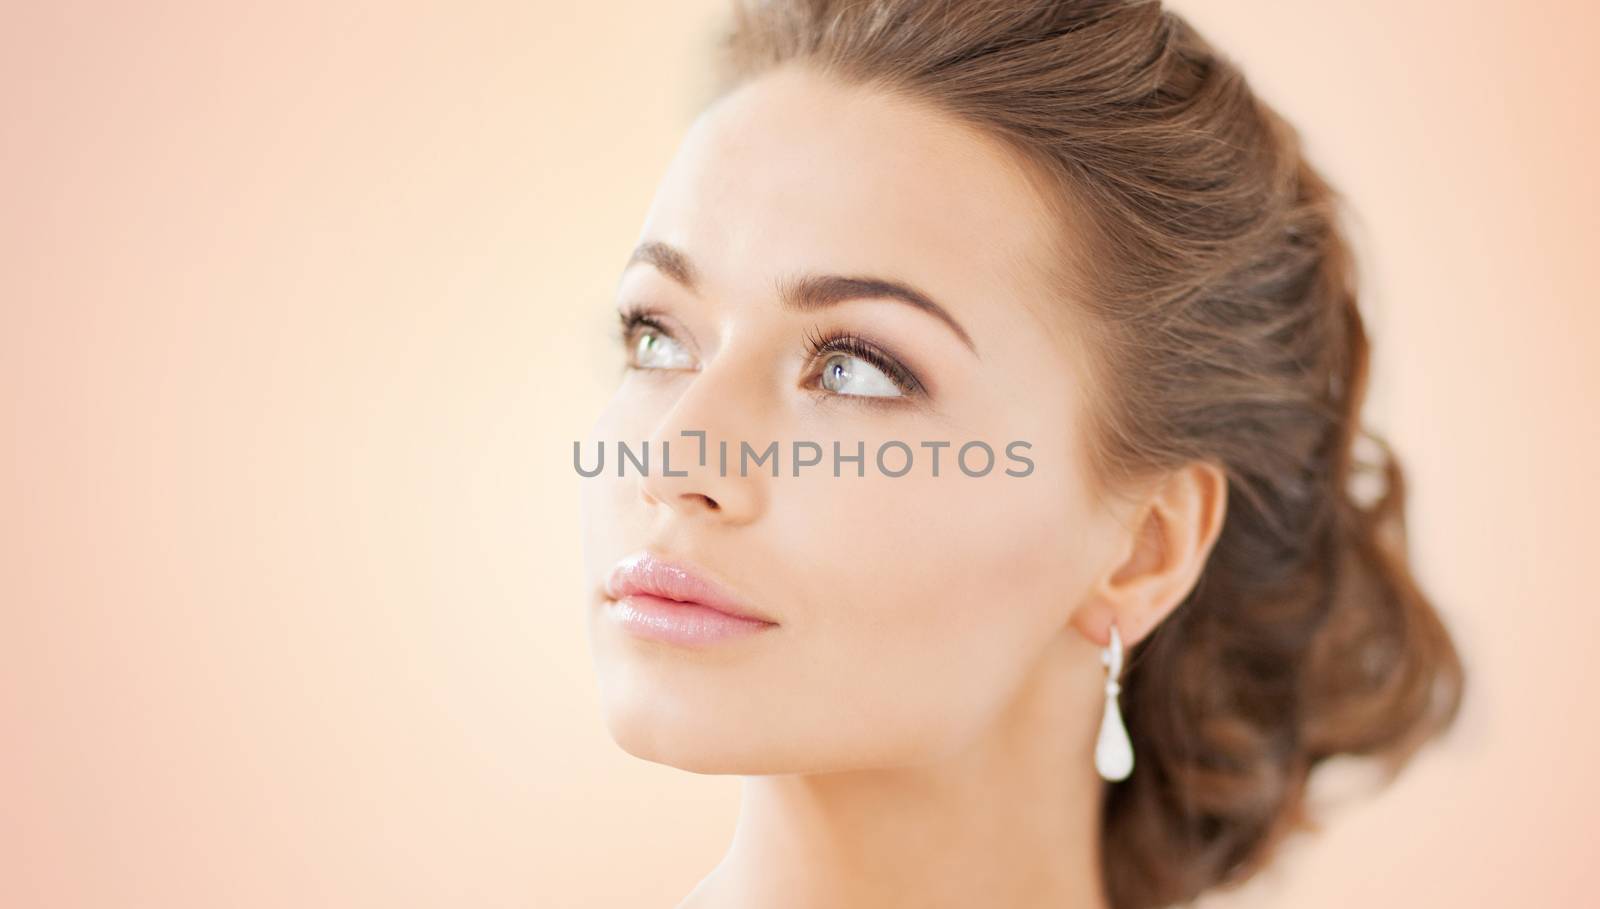 people, beauty, jewelry and accessories concept - beautiful woman with diamond earrings over beige background